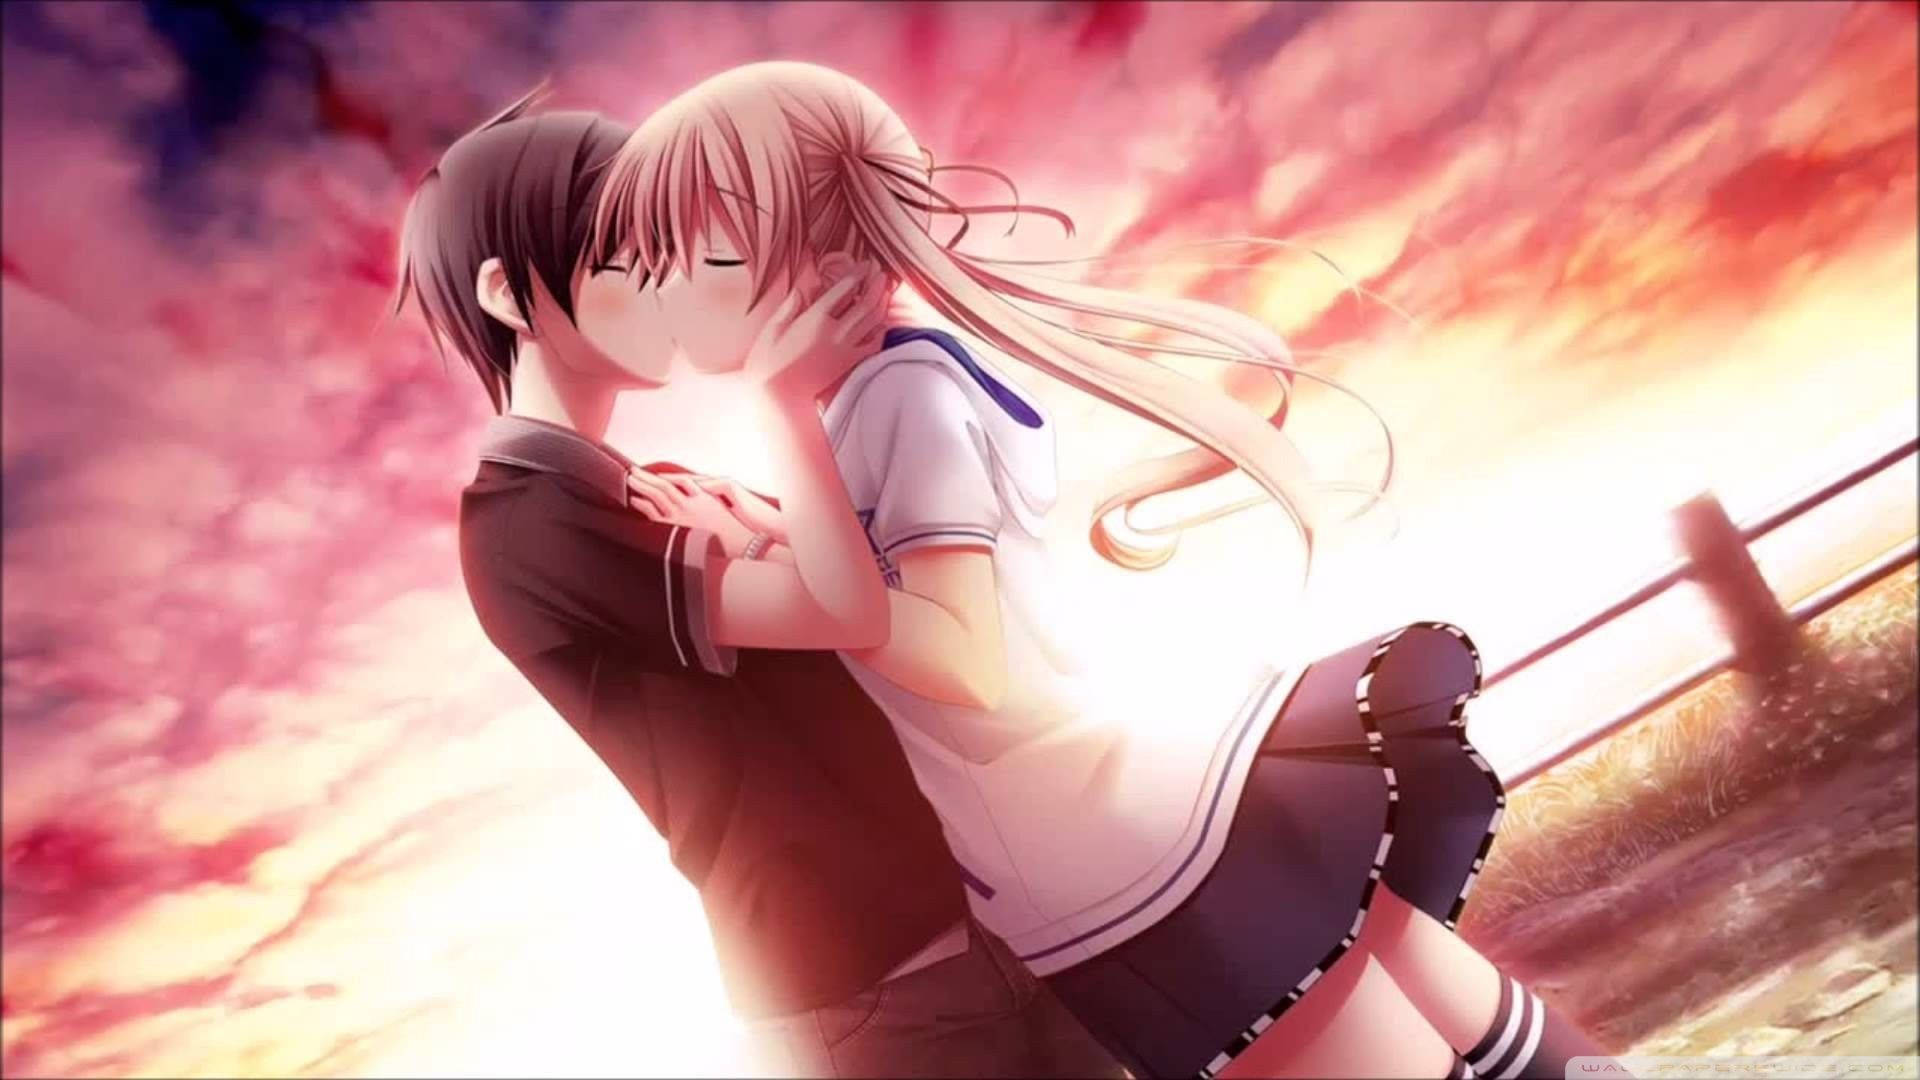 Boy And School Girl Kissing Love Anime Background